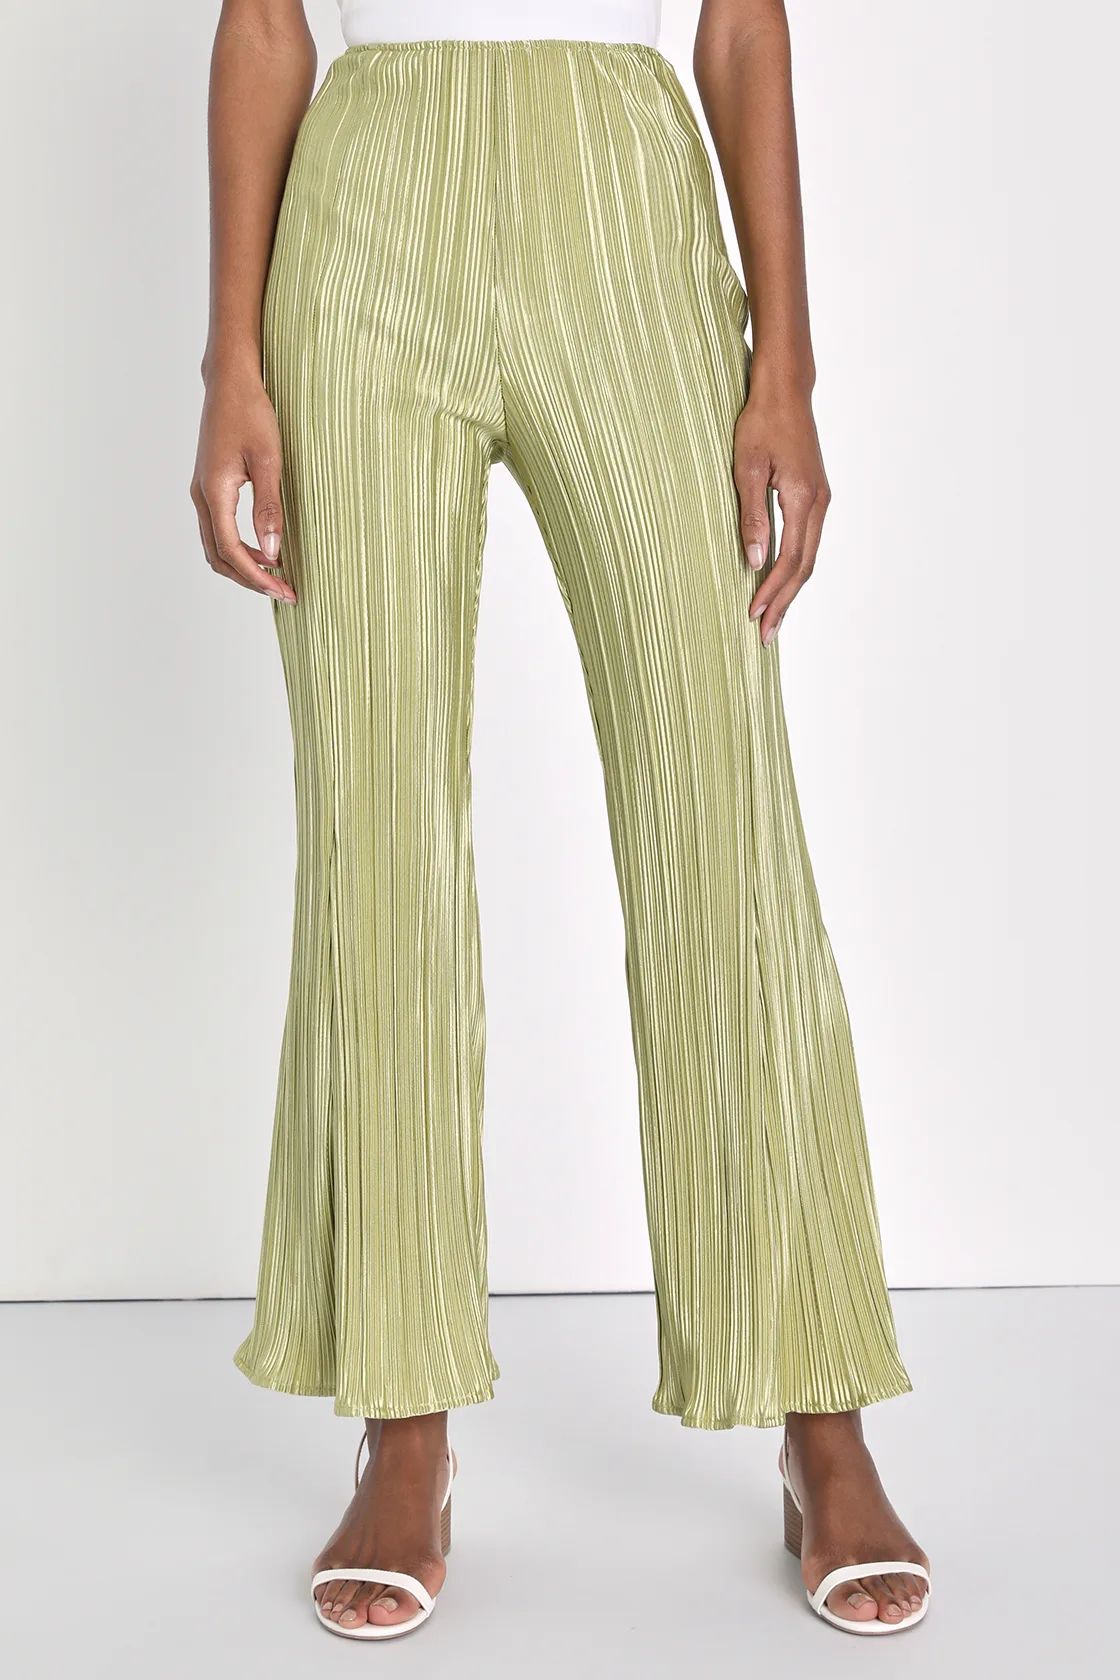 Pretty Flair Lime Green Pleated High-Waisted Flare Pants | Lulus (US)